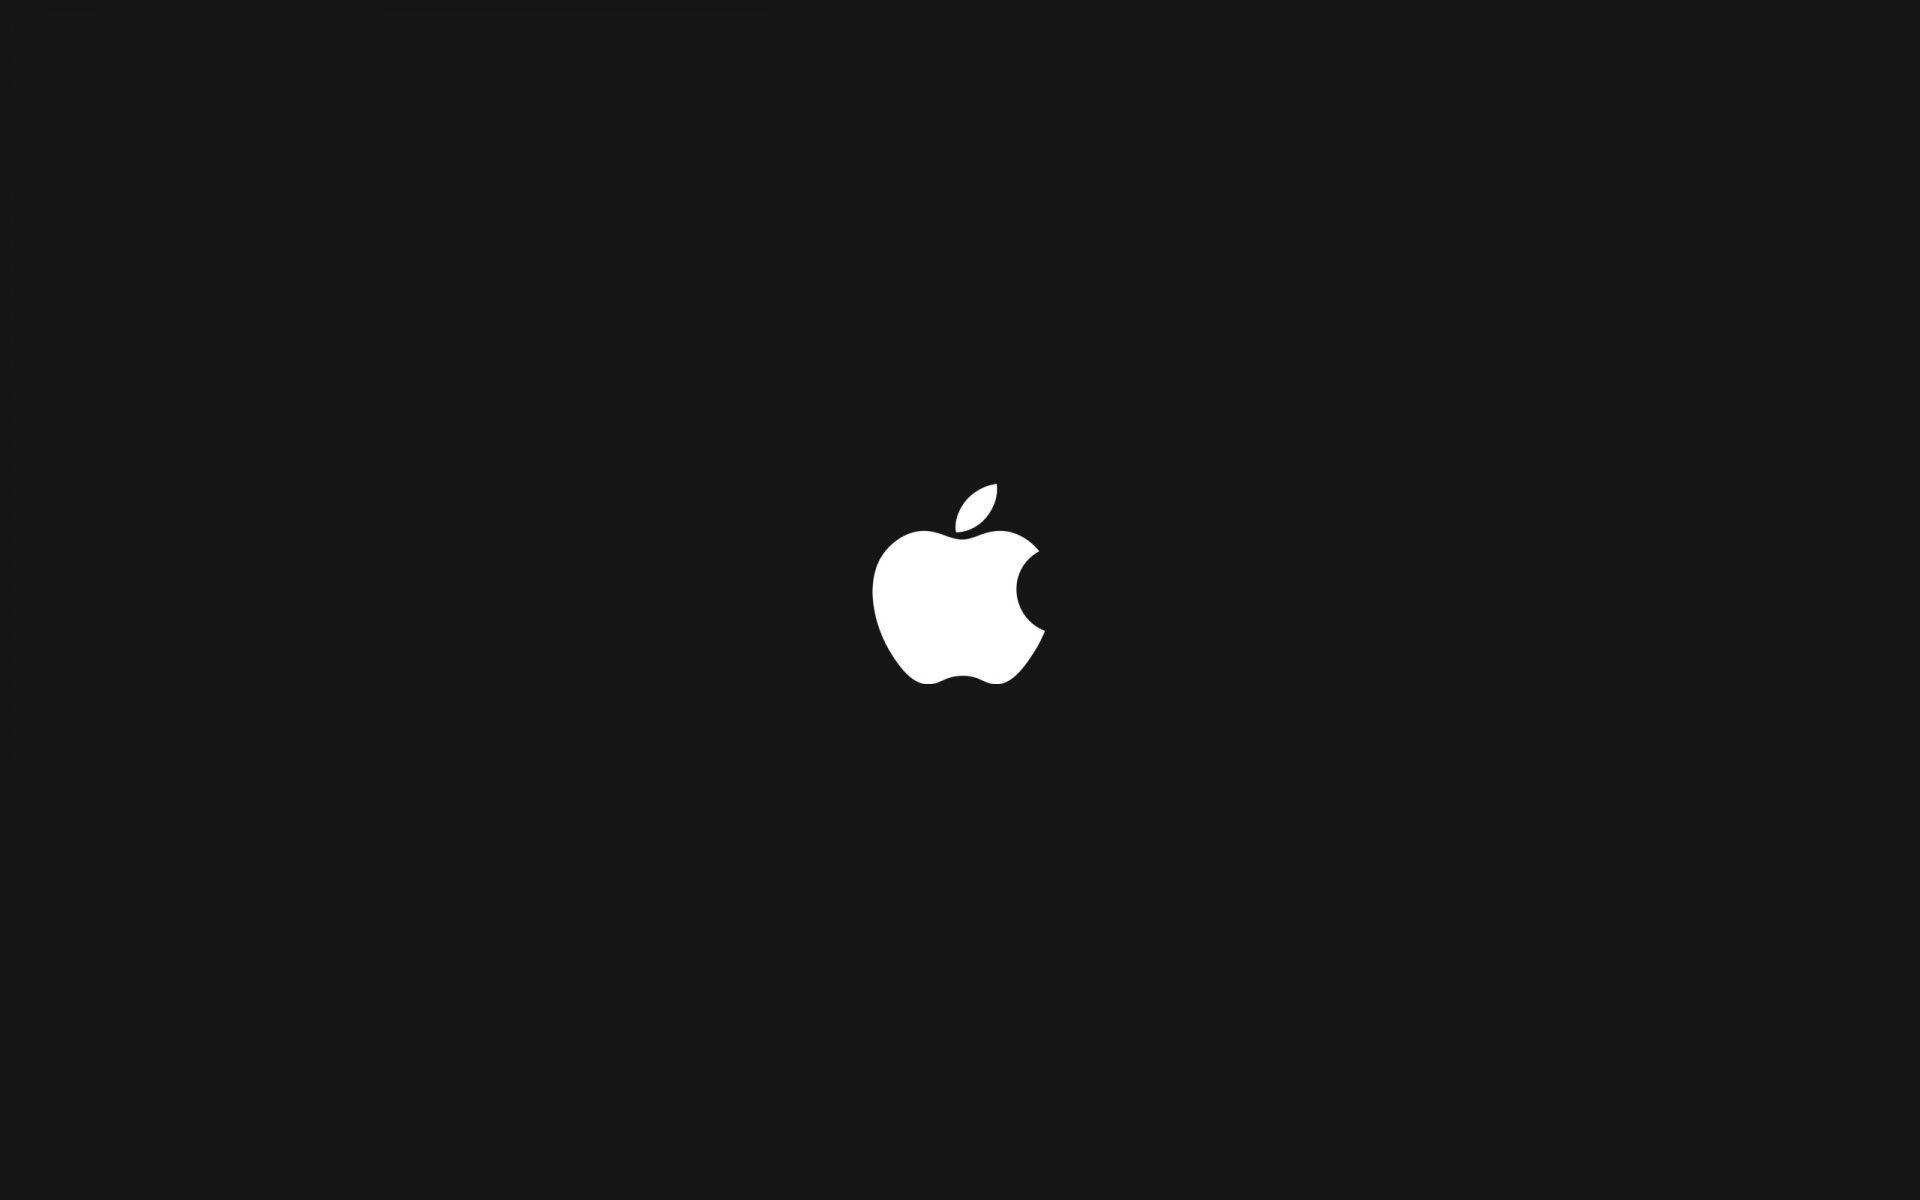 Black and Wight Logo - Black And White Apple Wallpapers - Wallpaper Cave